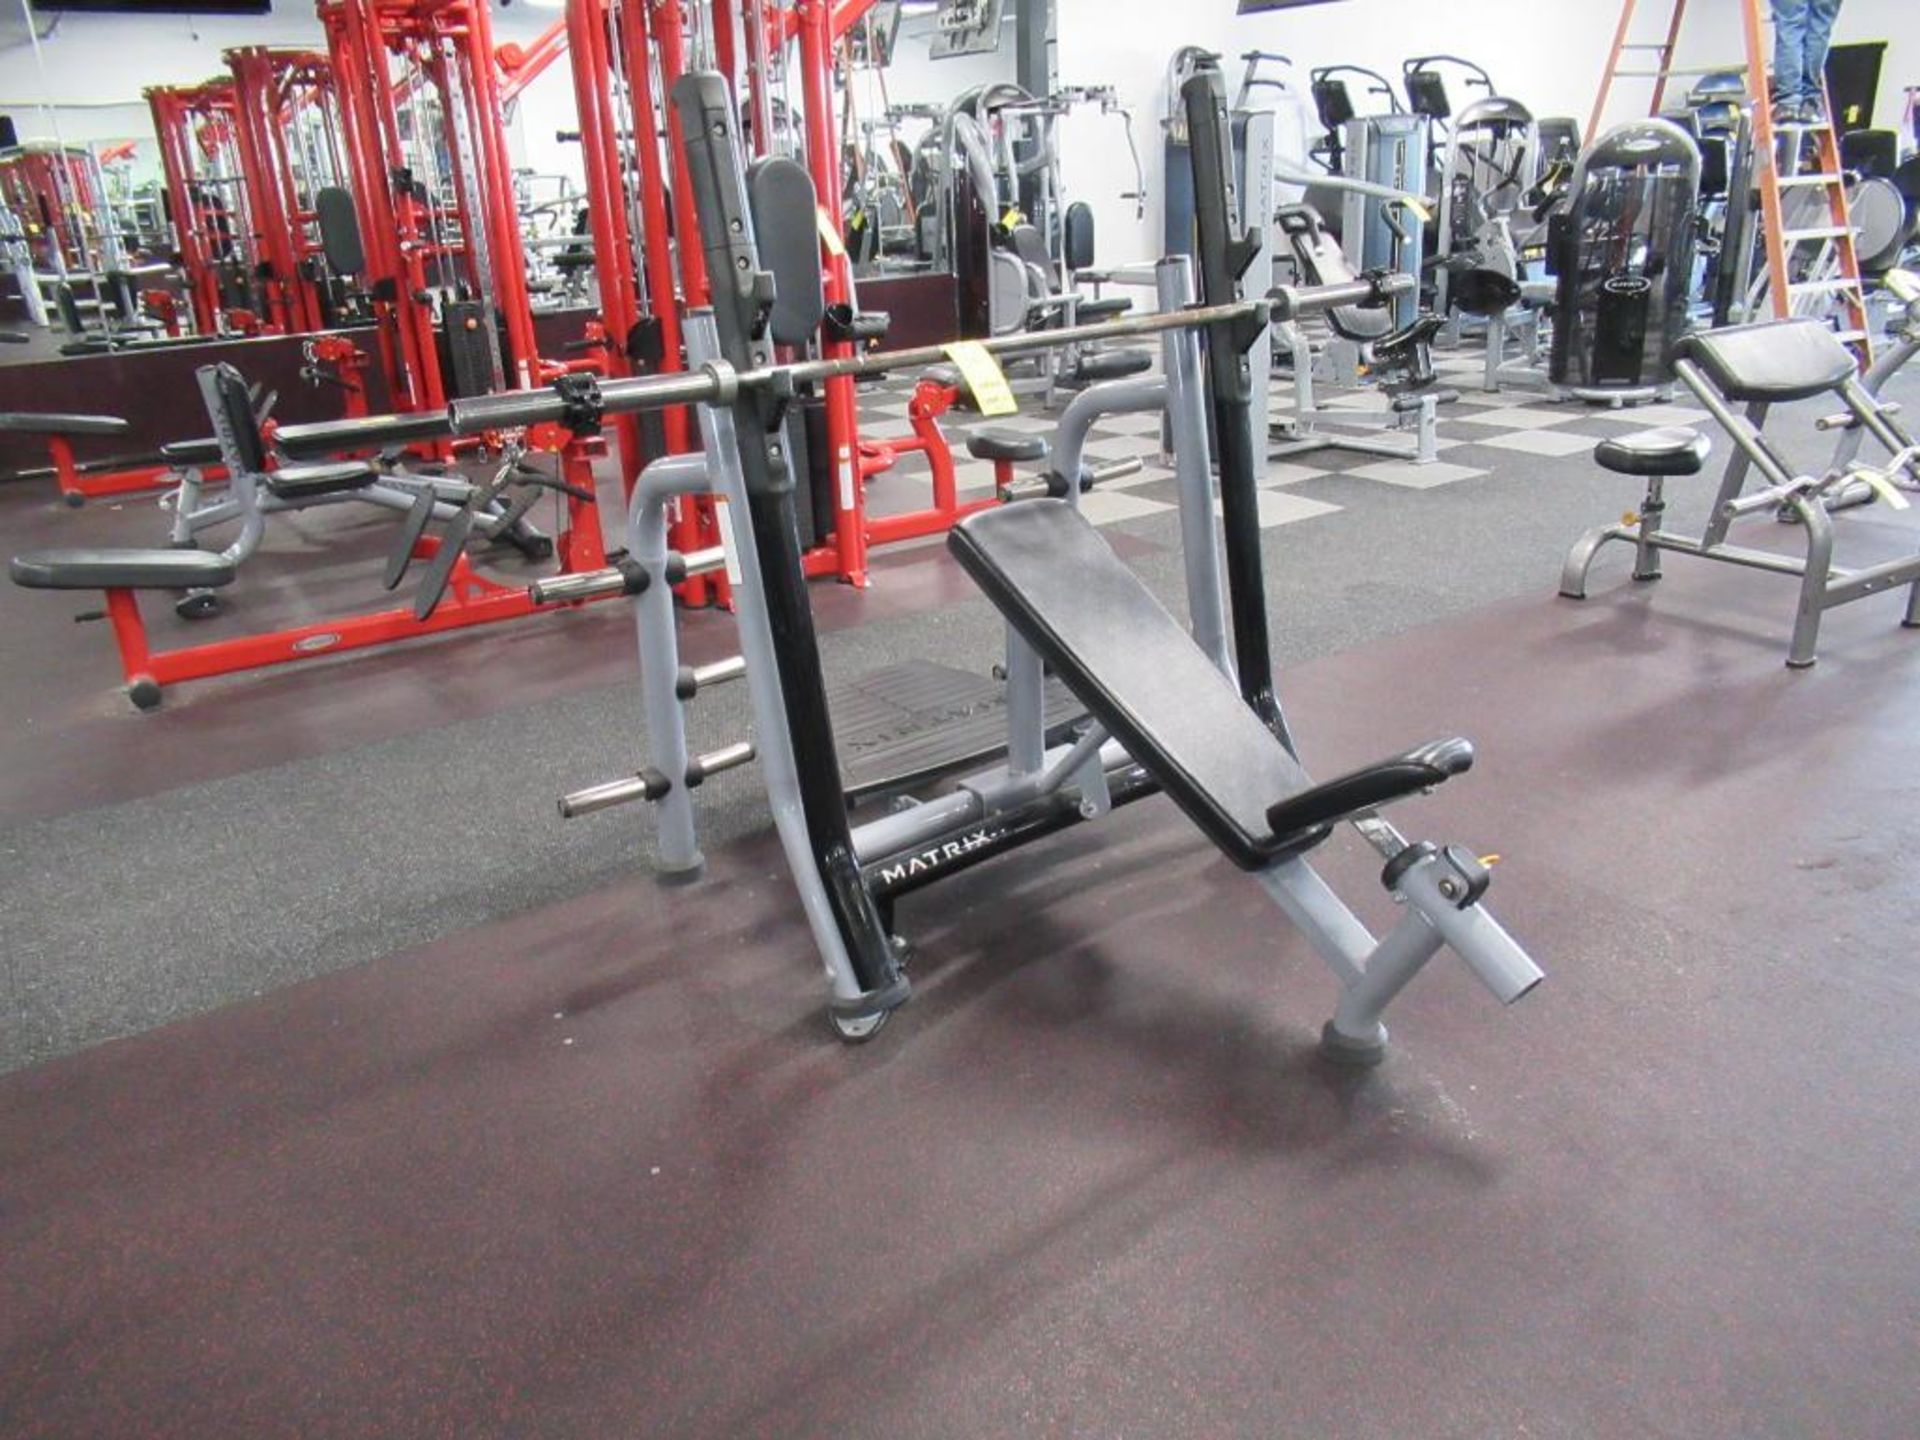 Matrix Model MG-A679B-04 Plated Loaded Bench Press, Spotting Deck, Plate Storage, Max Weight 400 lbs - Image 2 of 5